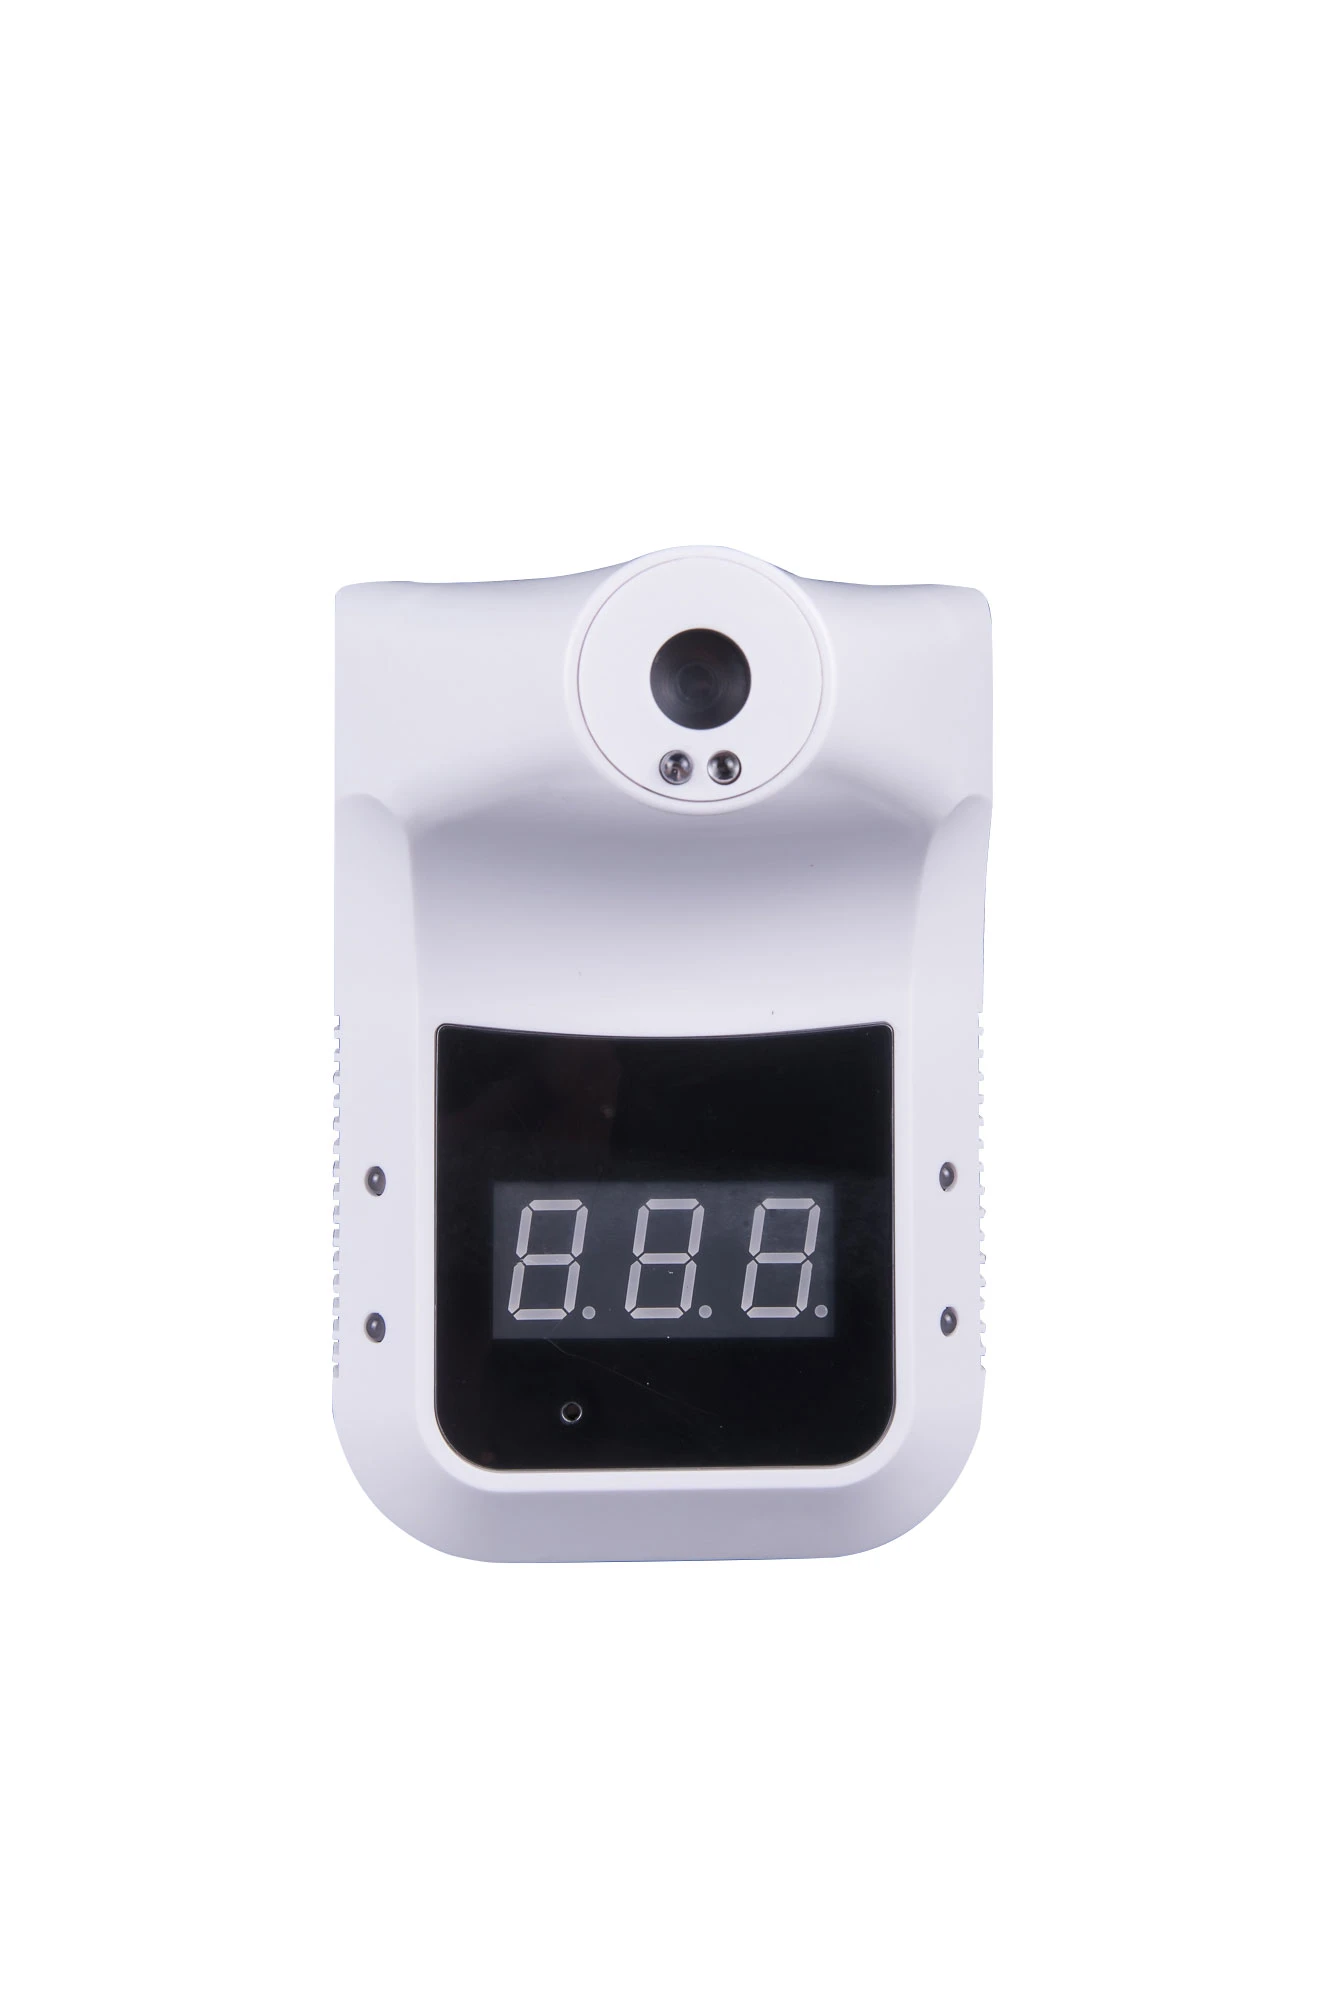 Auto Scan one week standby  electronic body temperature measuring instruments with USB cable and battery charging